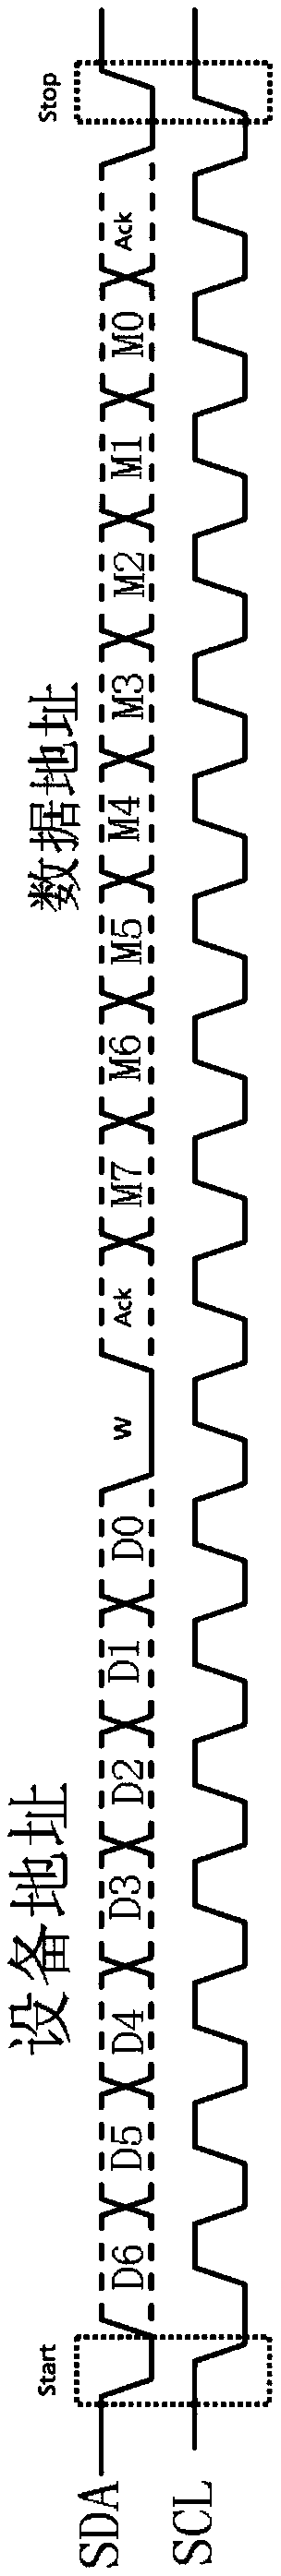 Optical module and its control circuit and method